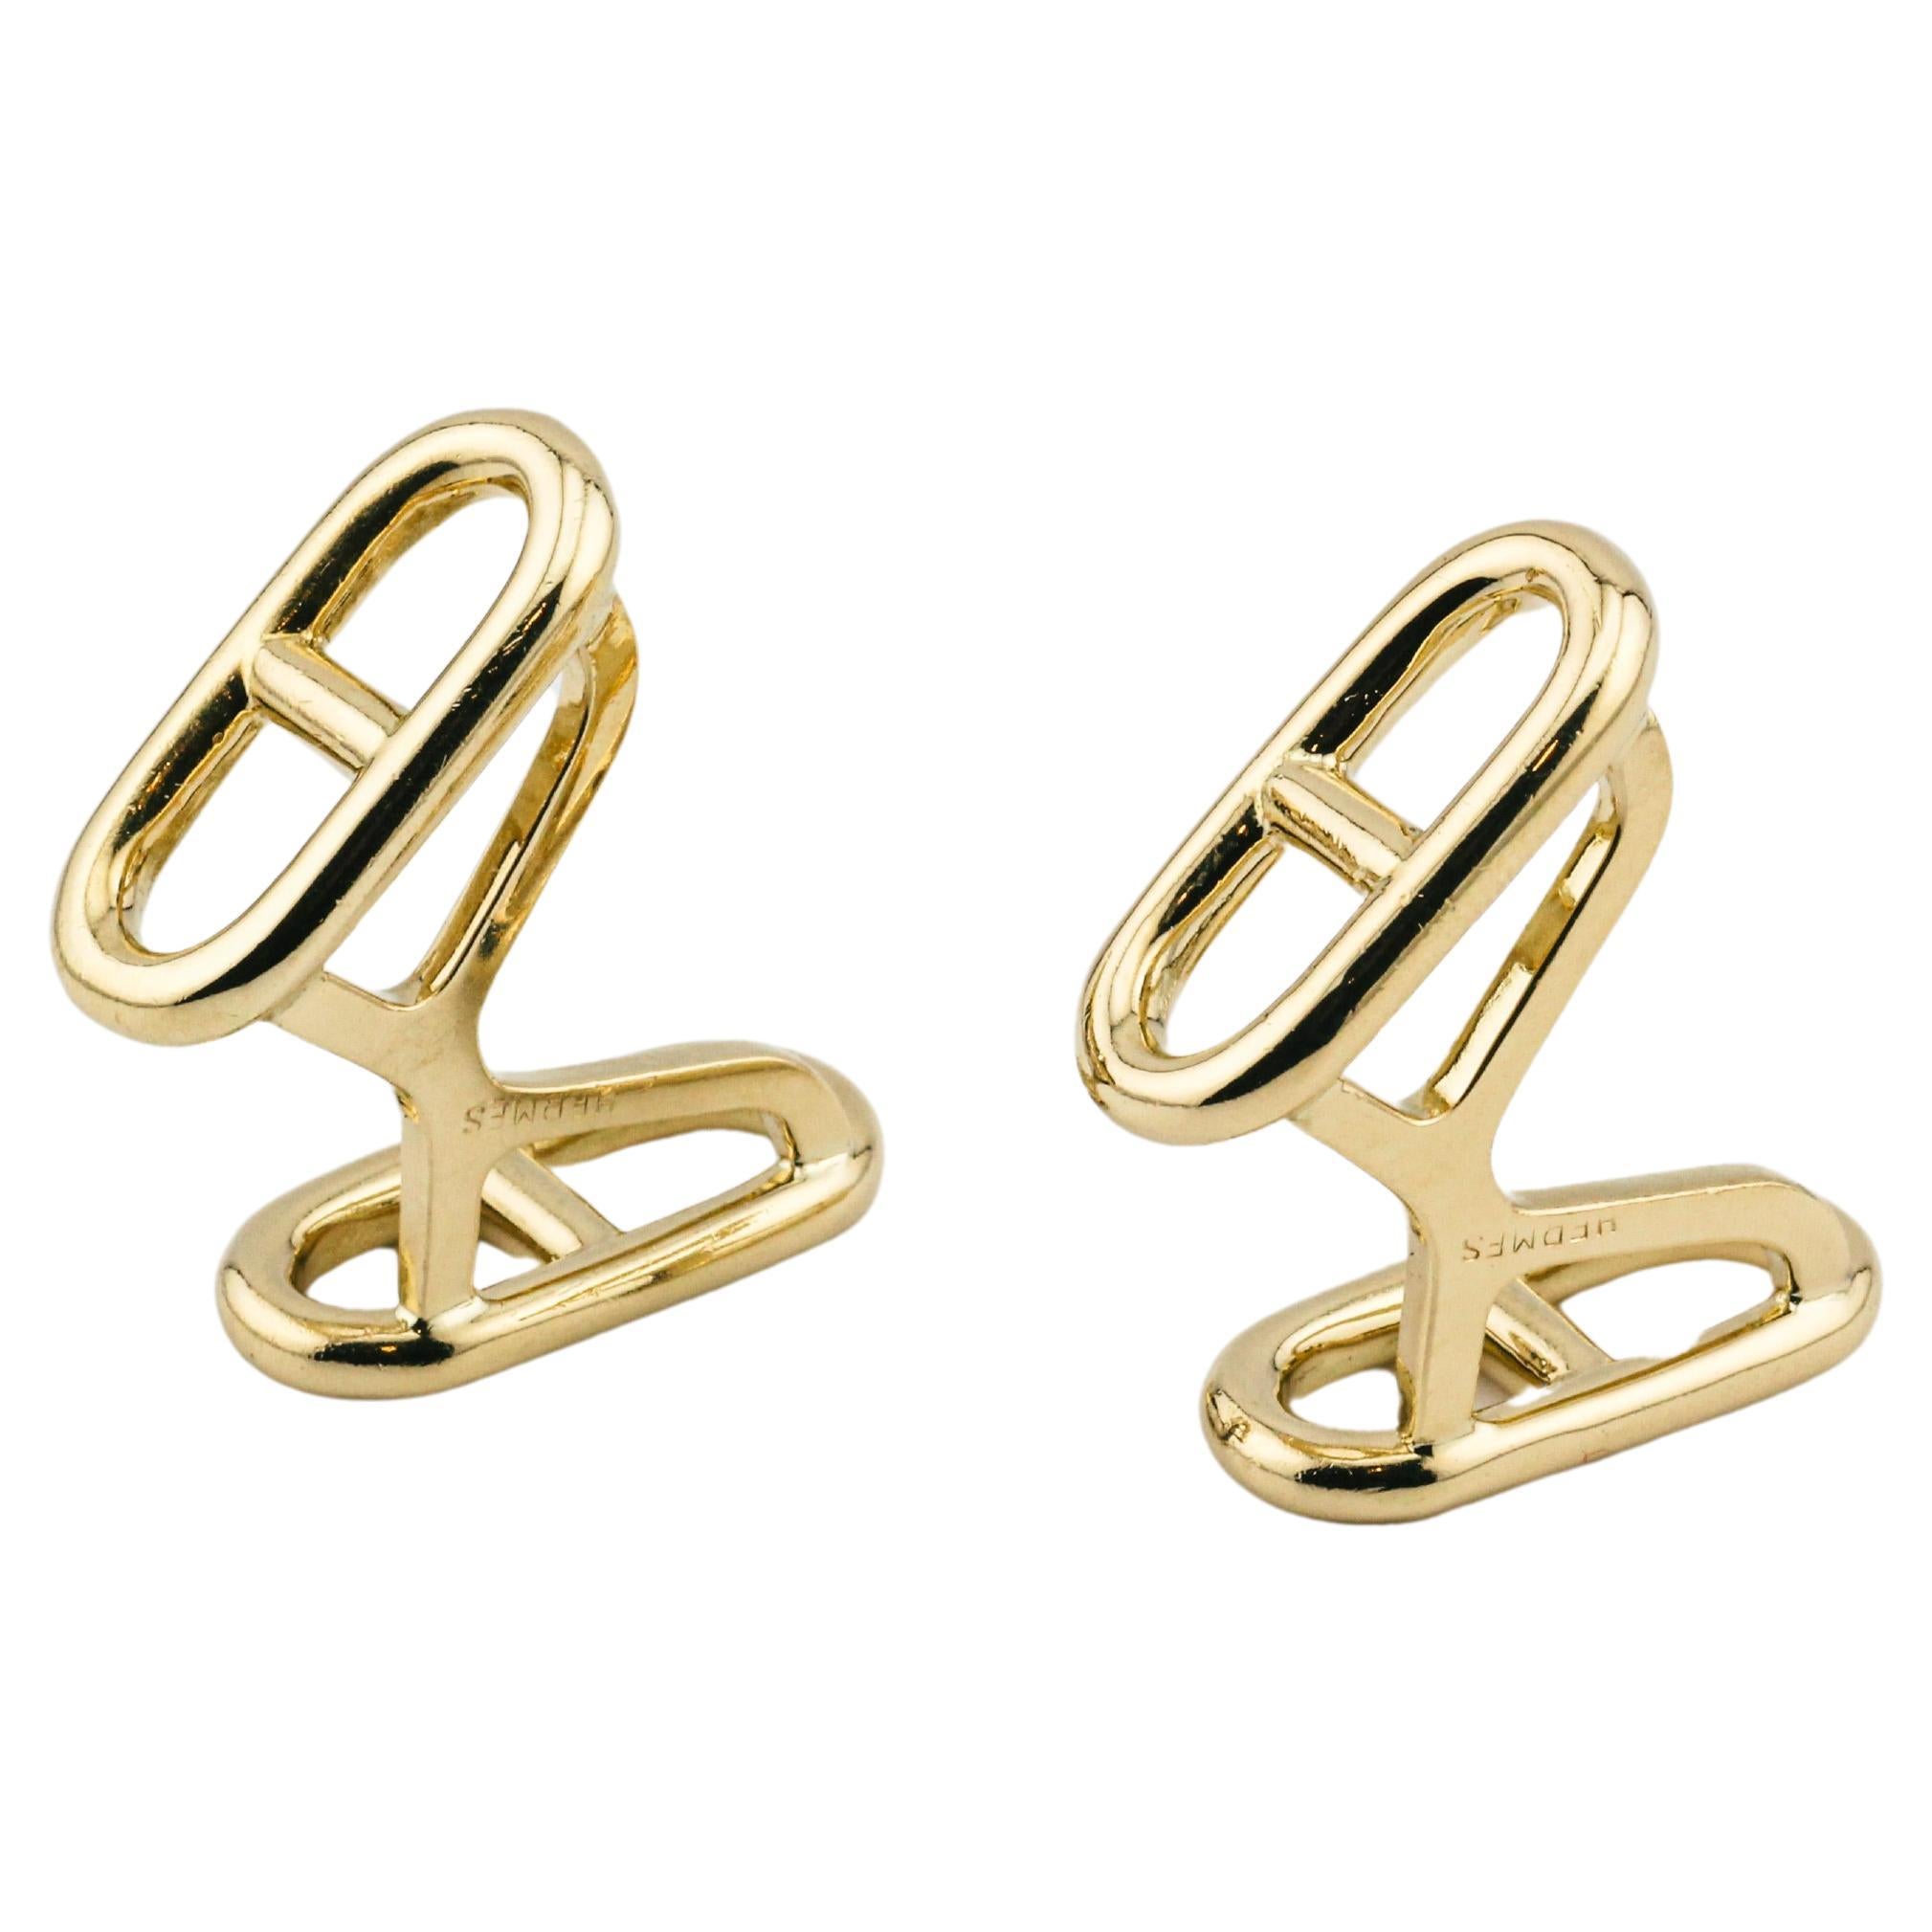 Hermes Vintage 1970s Chaine D'Ancre 18k Gold Cufflinks For Sale